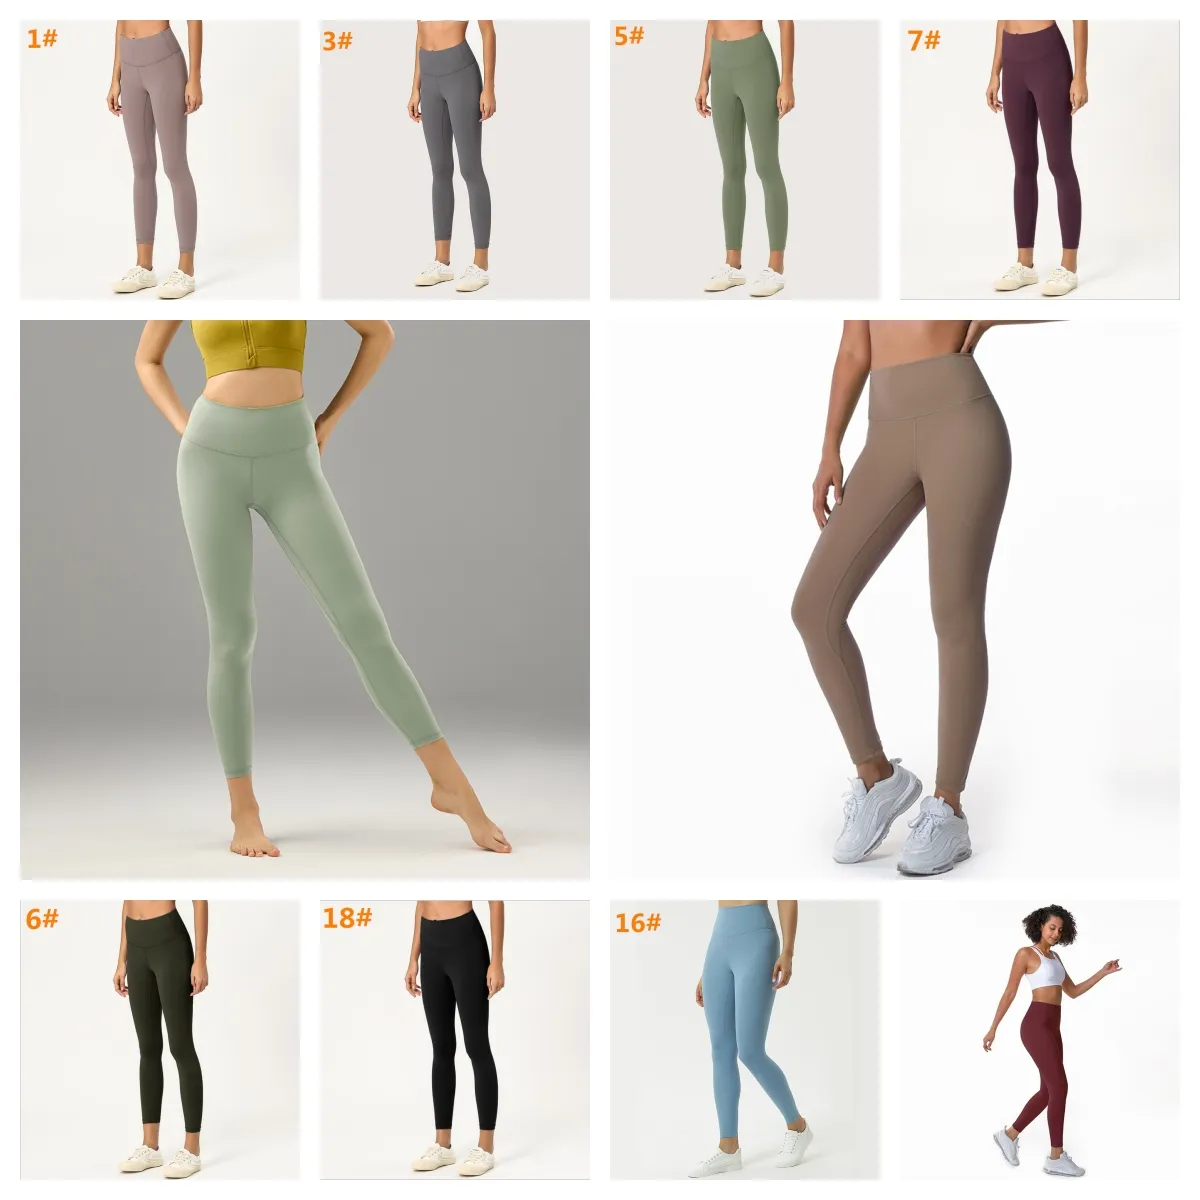 High Quality Solid Color Yoga Pants For Women Elastic Waist, Fitness Gym  Leggings With Tummy Control From Smartears, $19.08